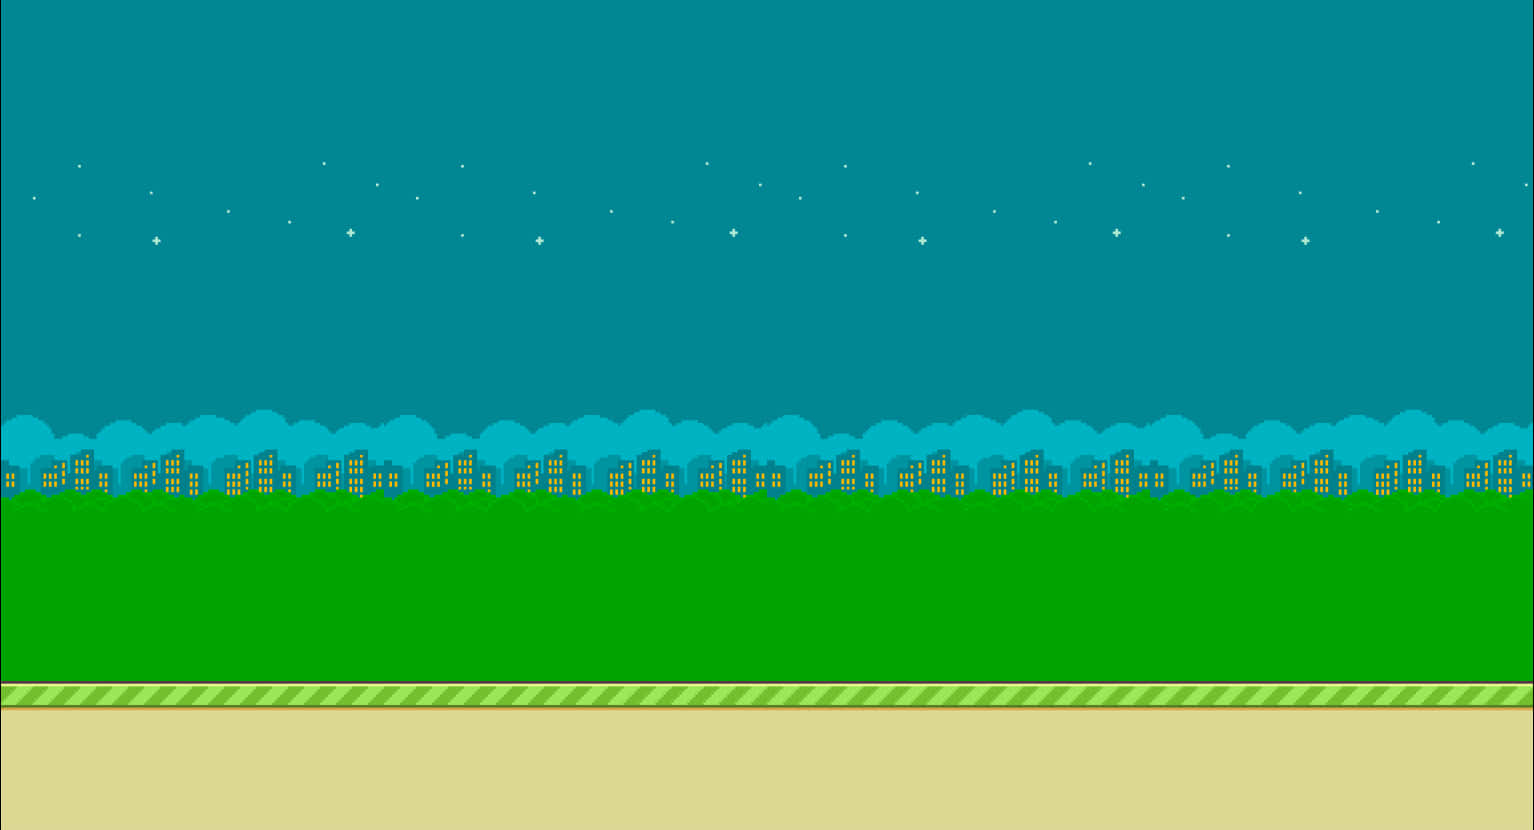 A Screenshot Of A Game With A Green Field And Trees